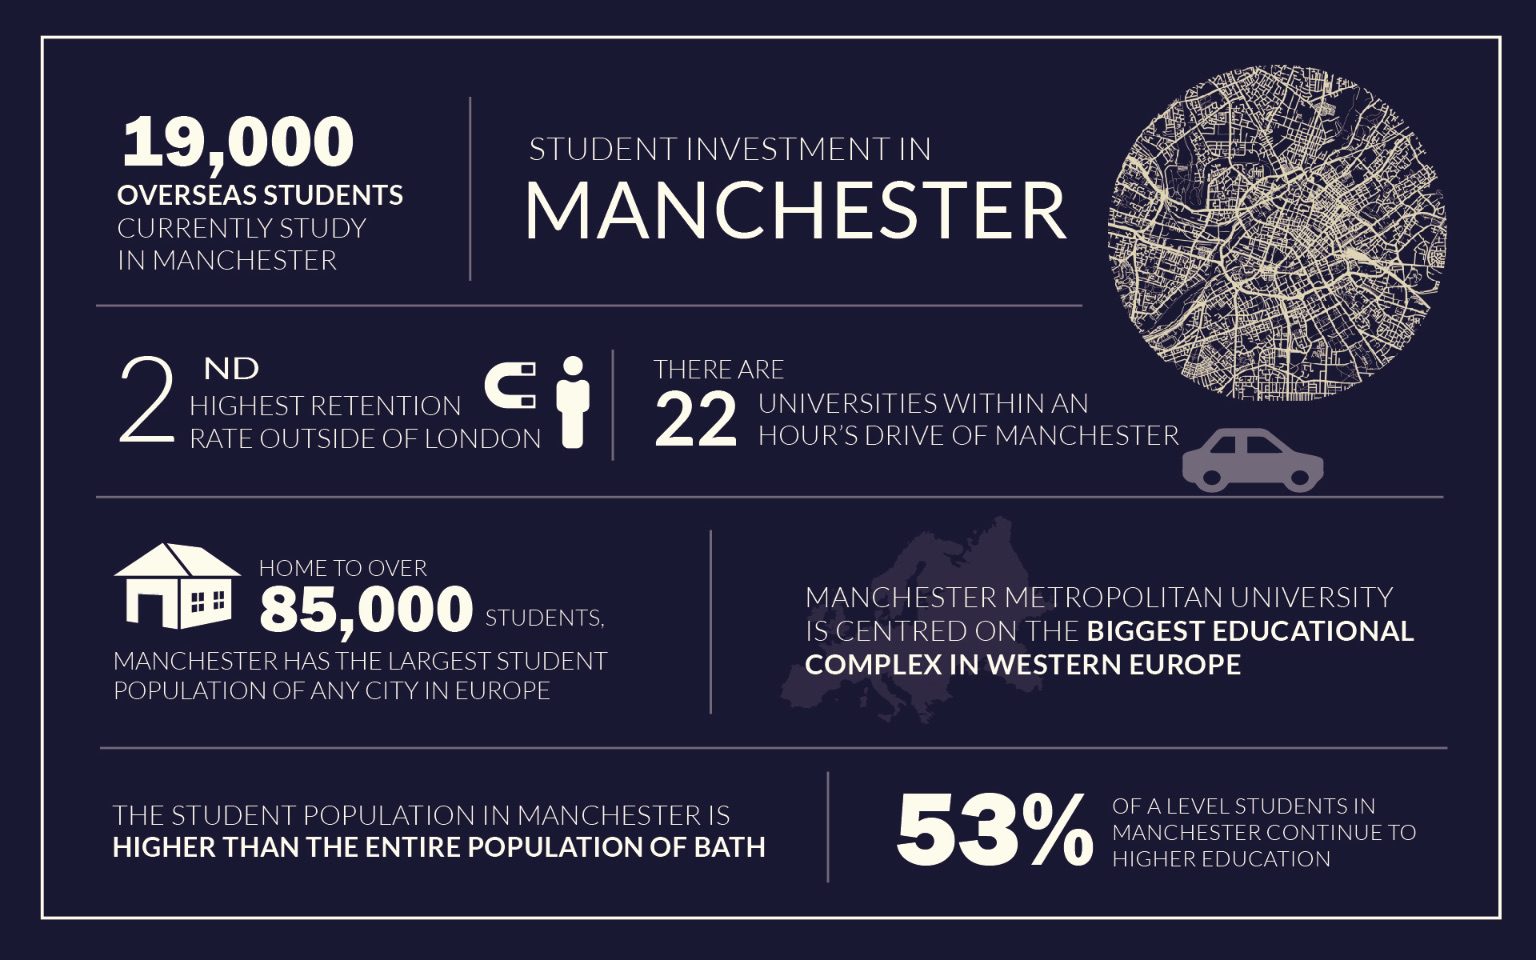 Student Property Market in Manchester infographic